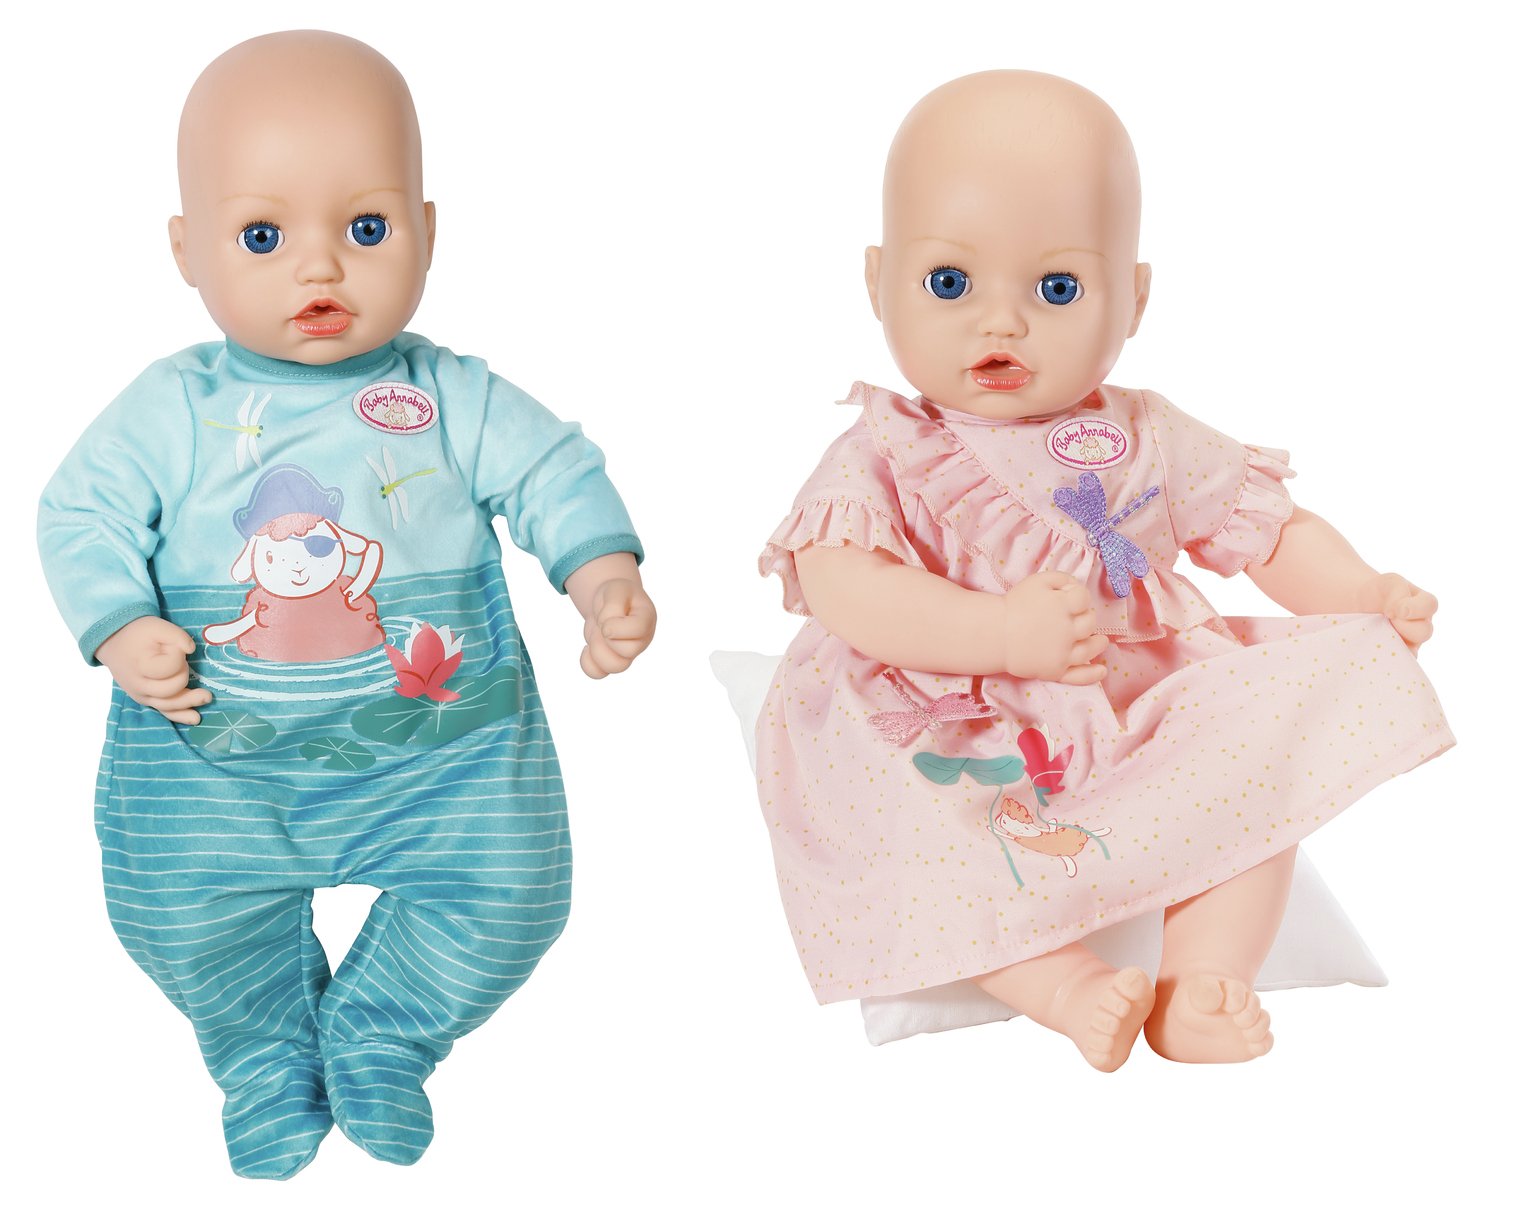 Baby Annabell Fashion Assortment Review